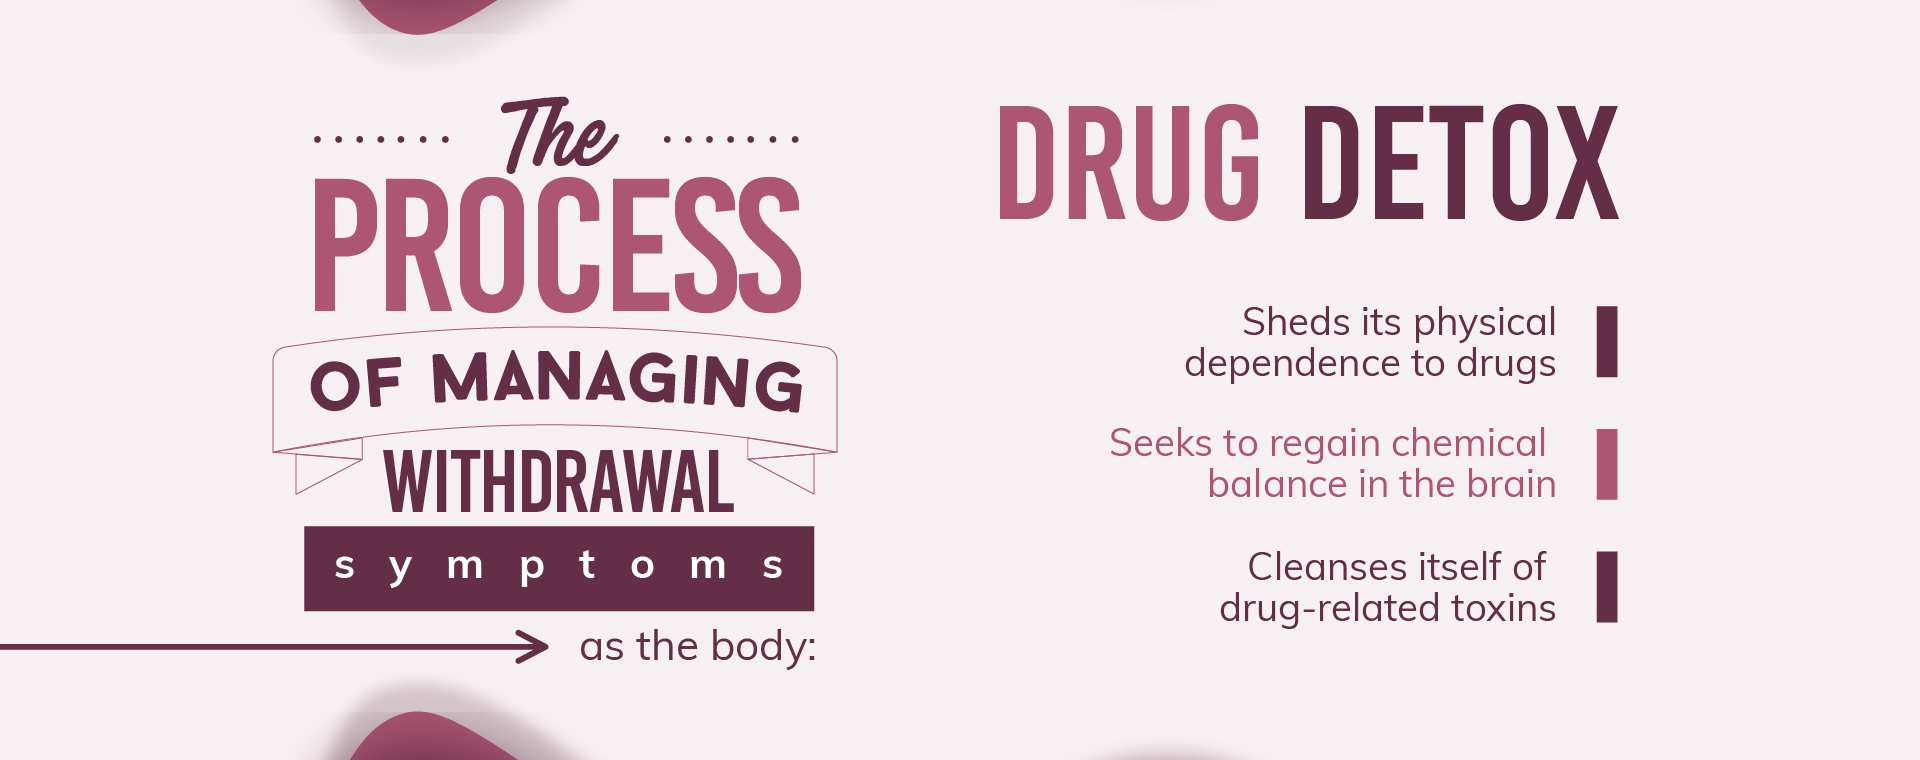 Drug detox sheds its physical dependence to drugs, seeks to regain chemical balance in the brain and cleanses itself of drug-related toxins